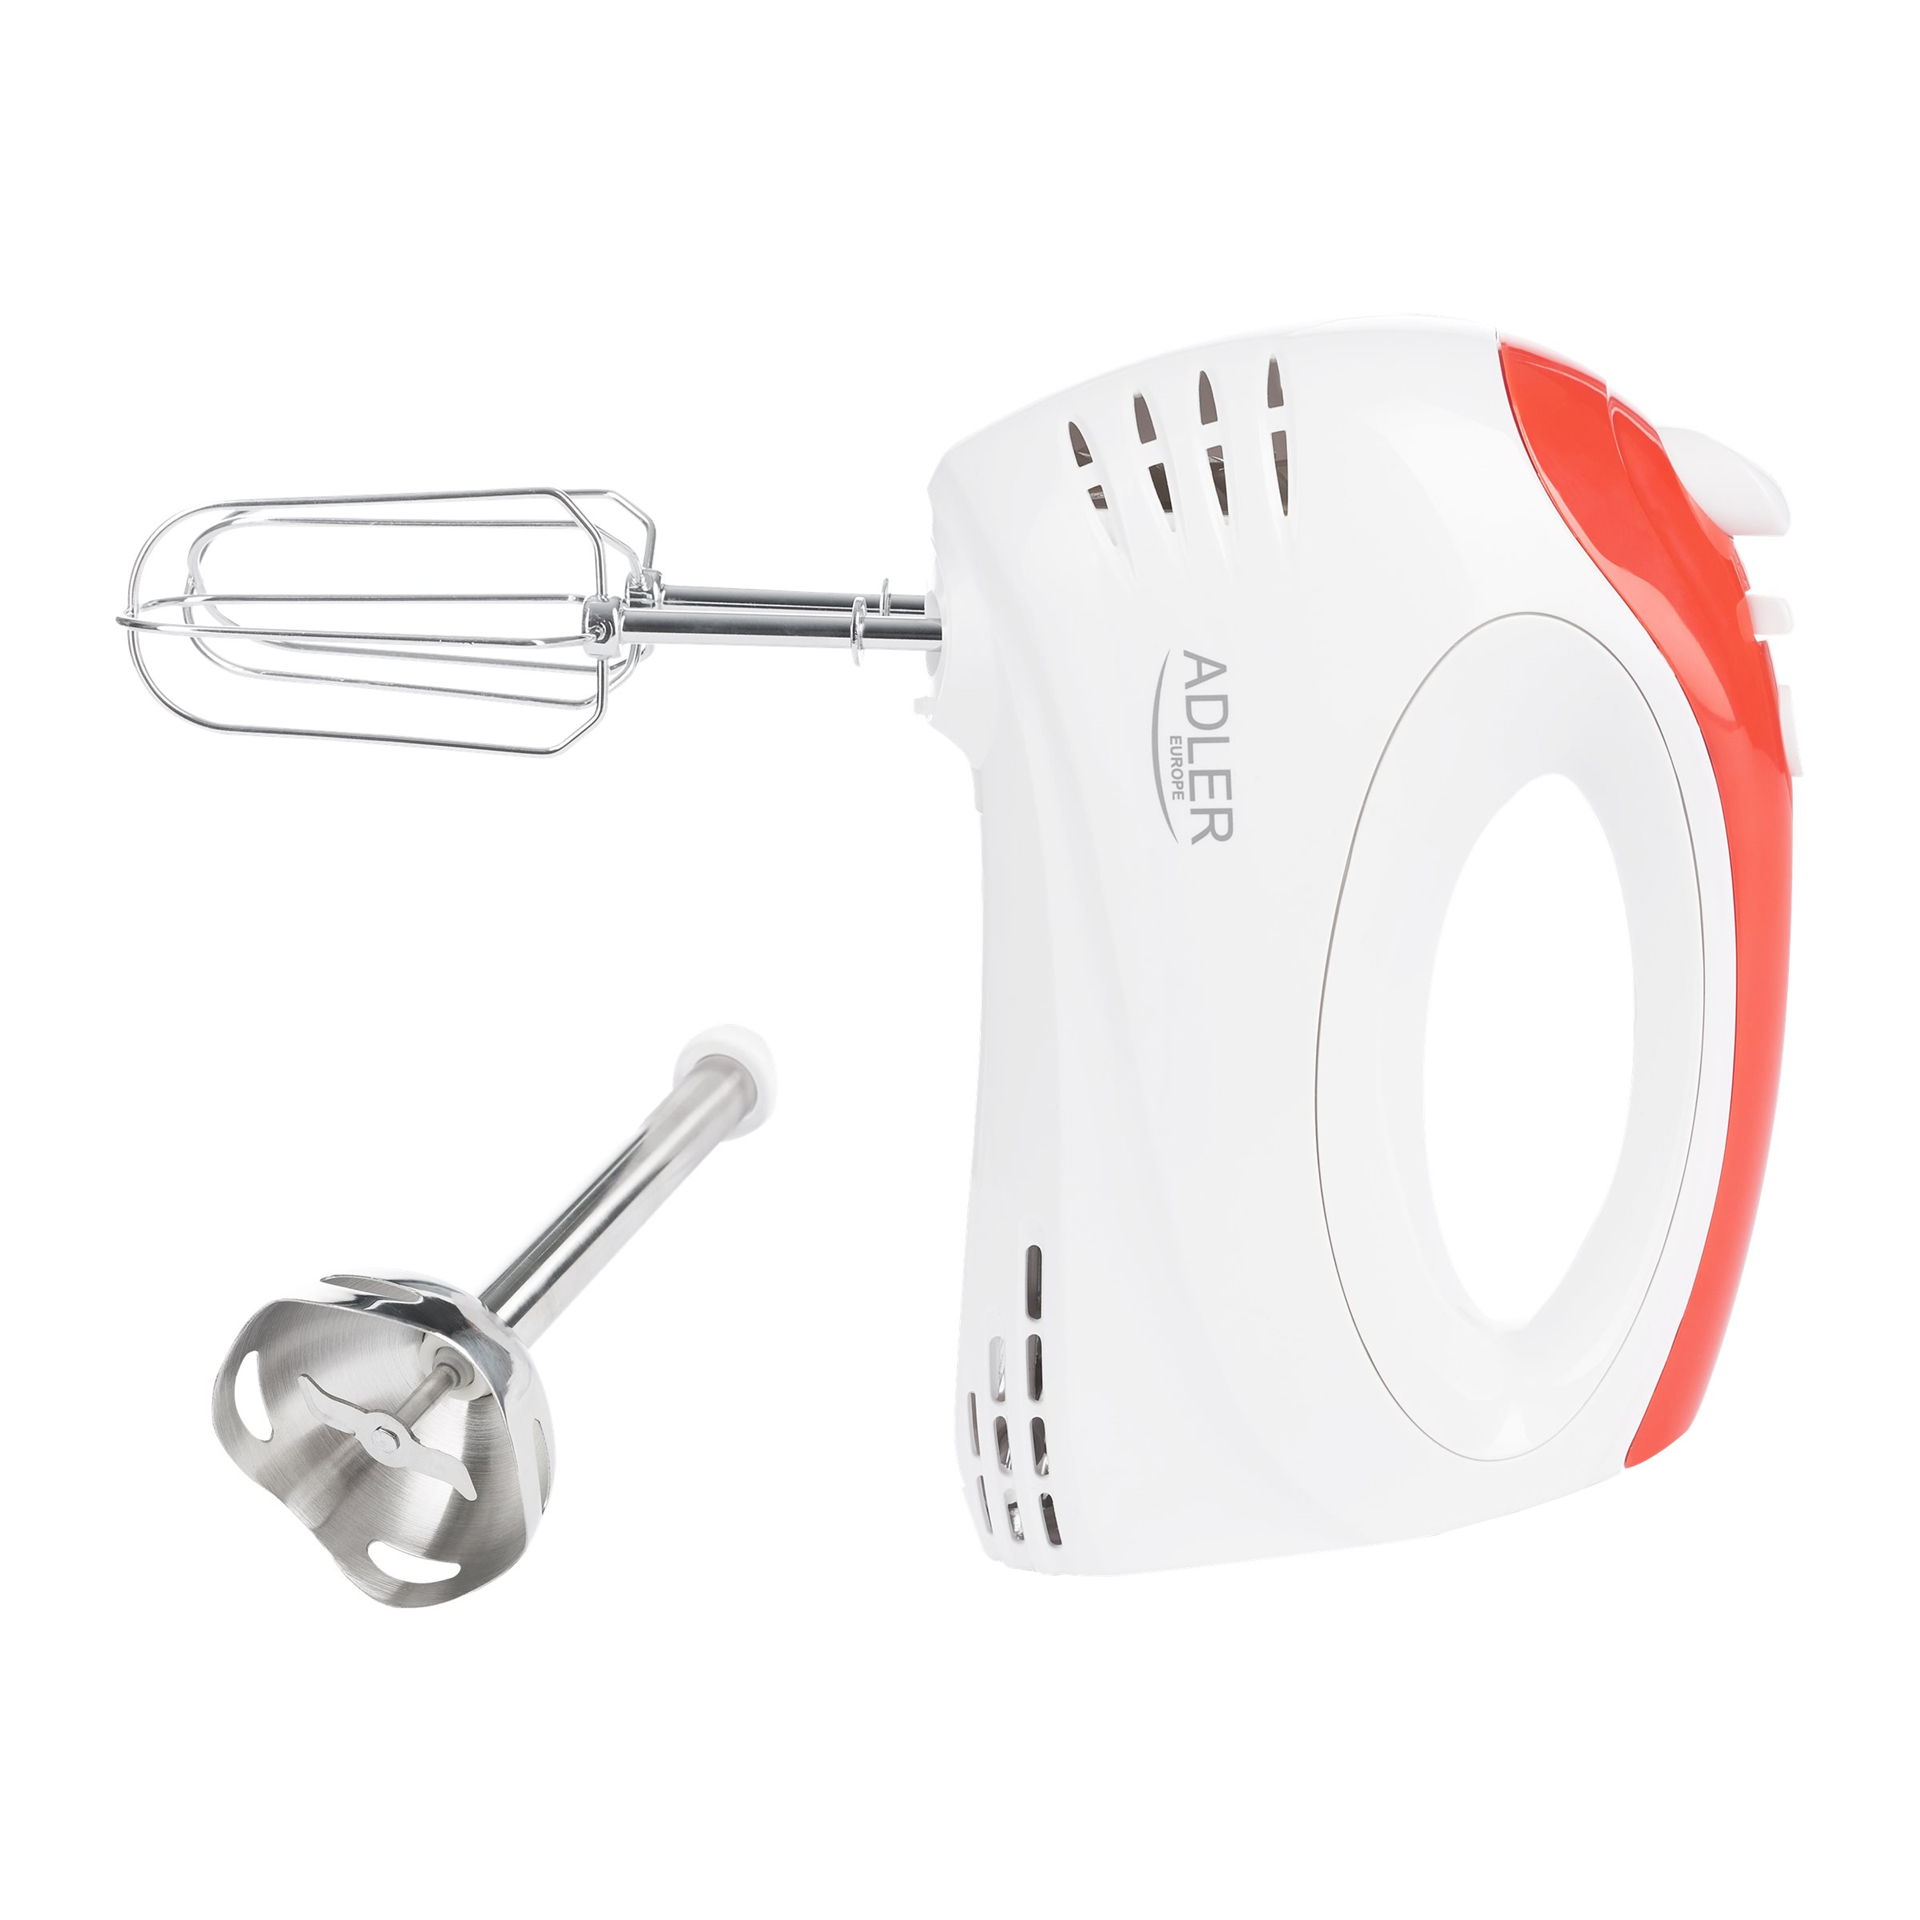 Adler Mixer AD 4212 Hand Mixer 300 W Number of speeds 5 Turbo mode White